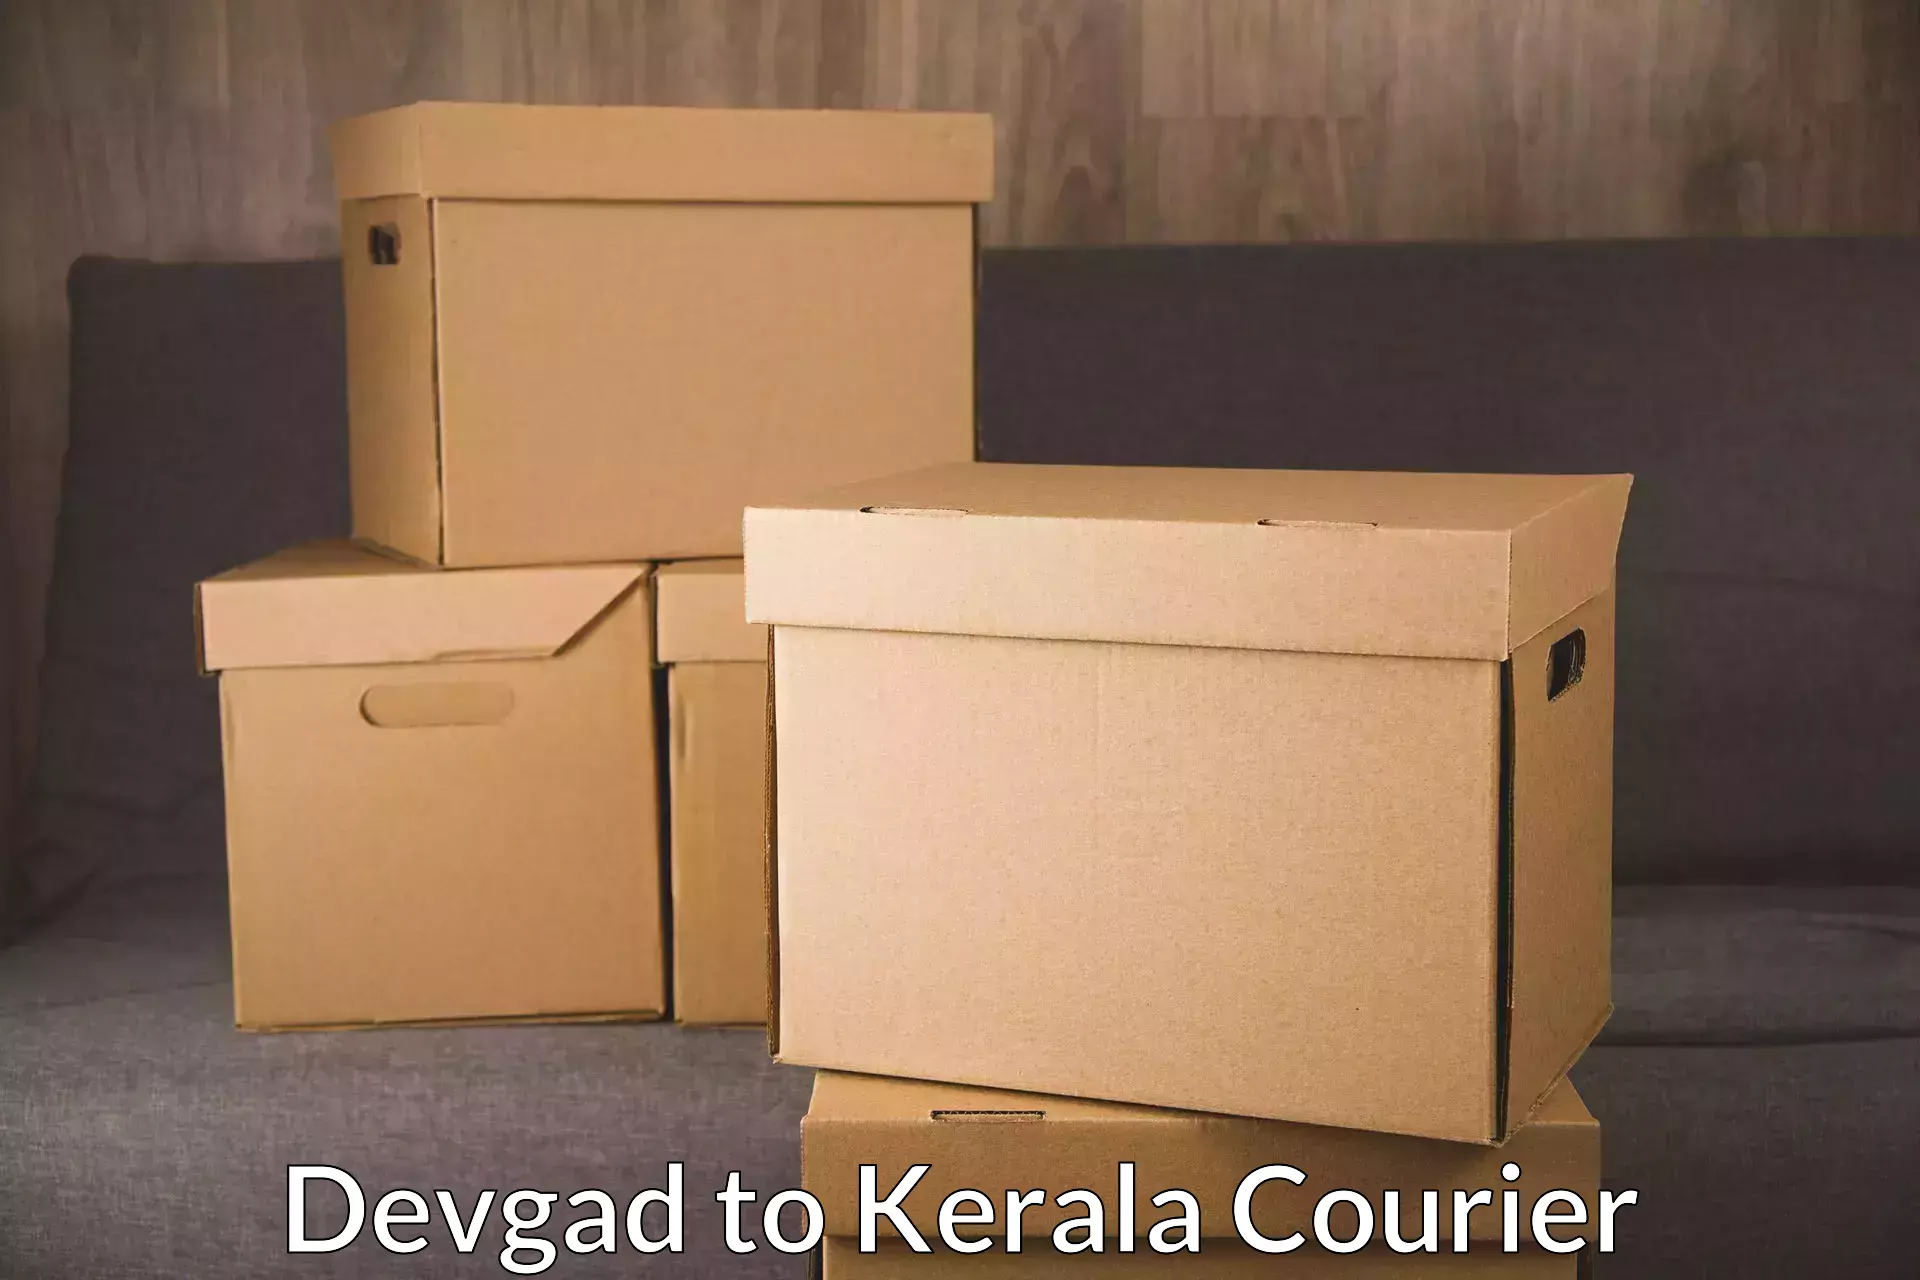 Express delivery network Devgad to Kerala